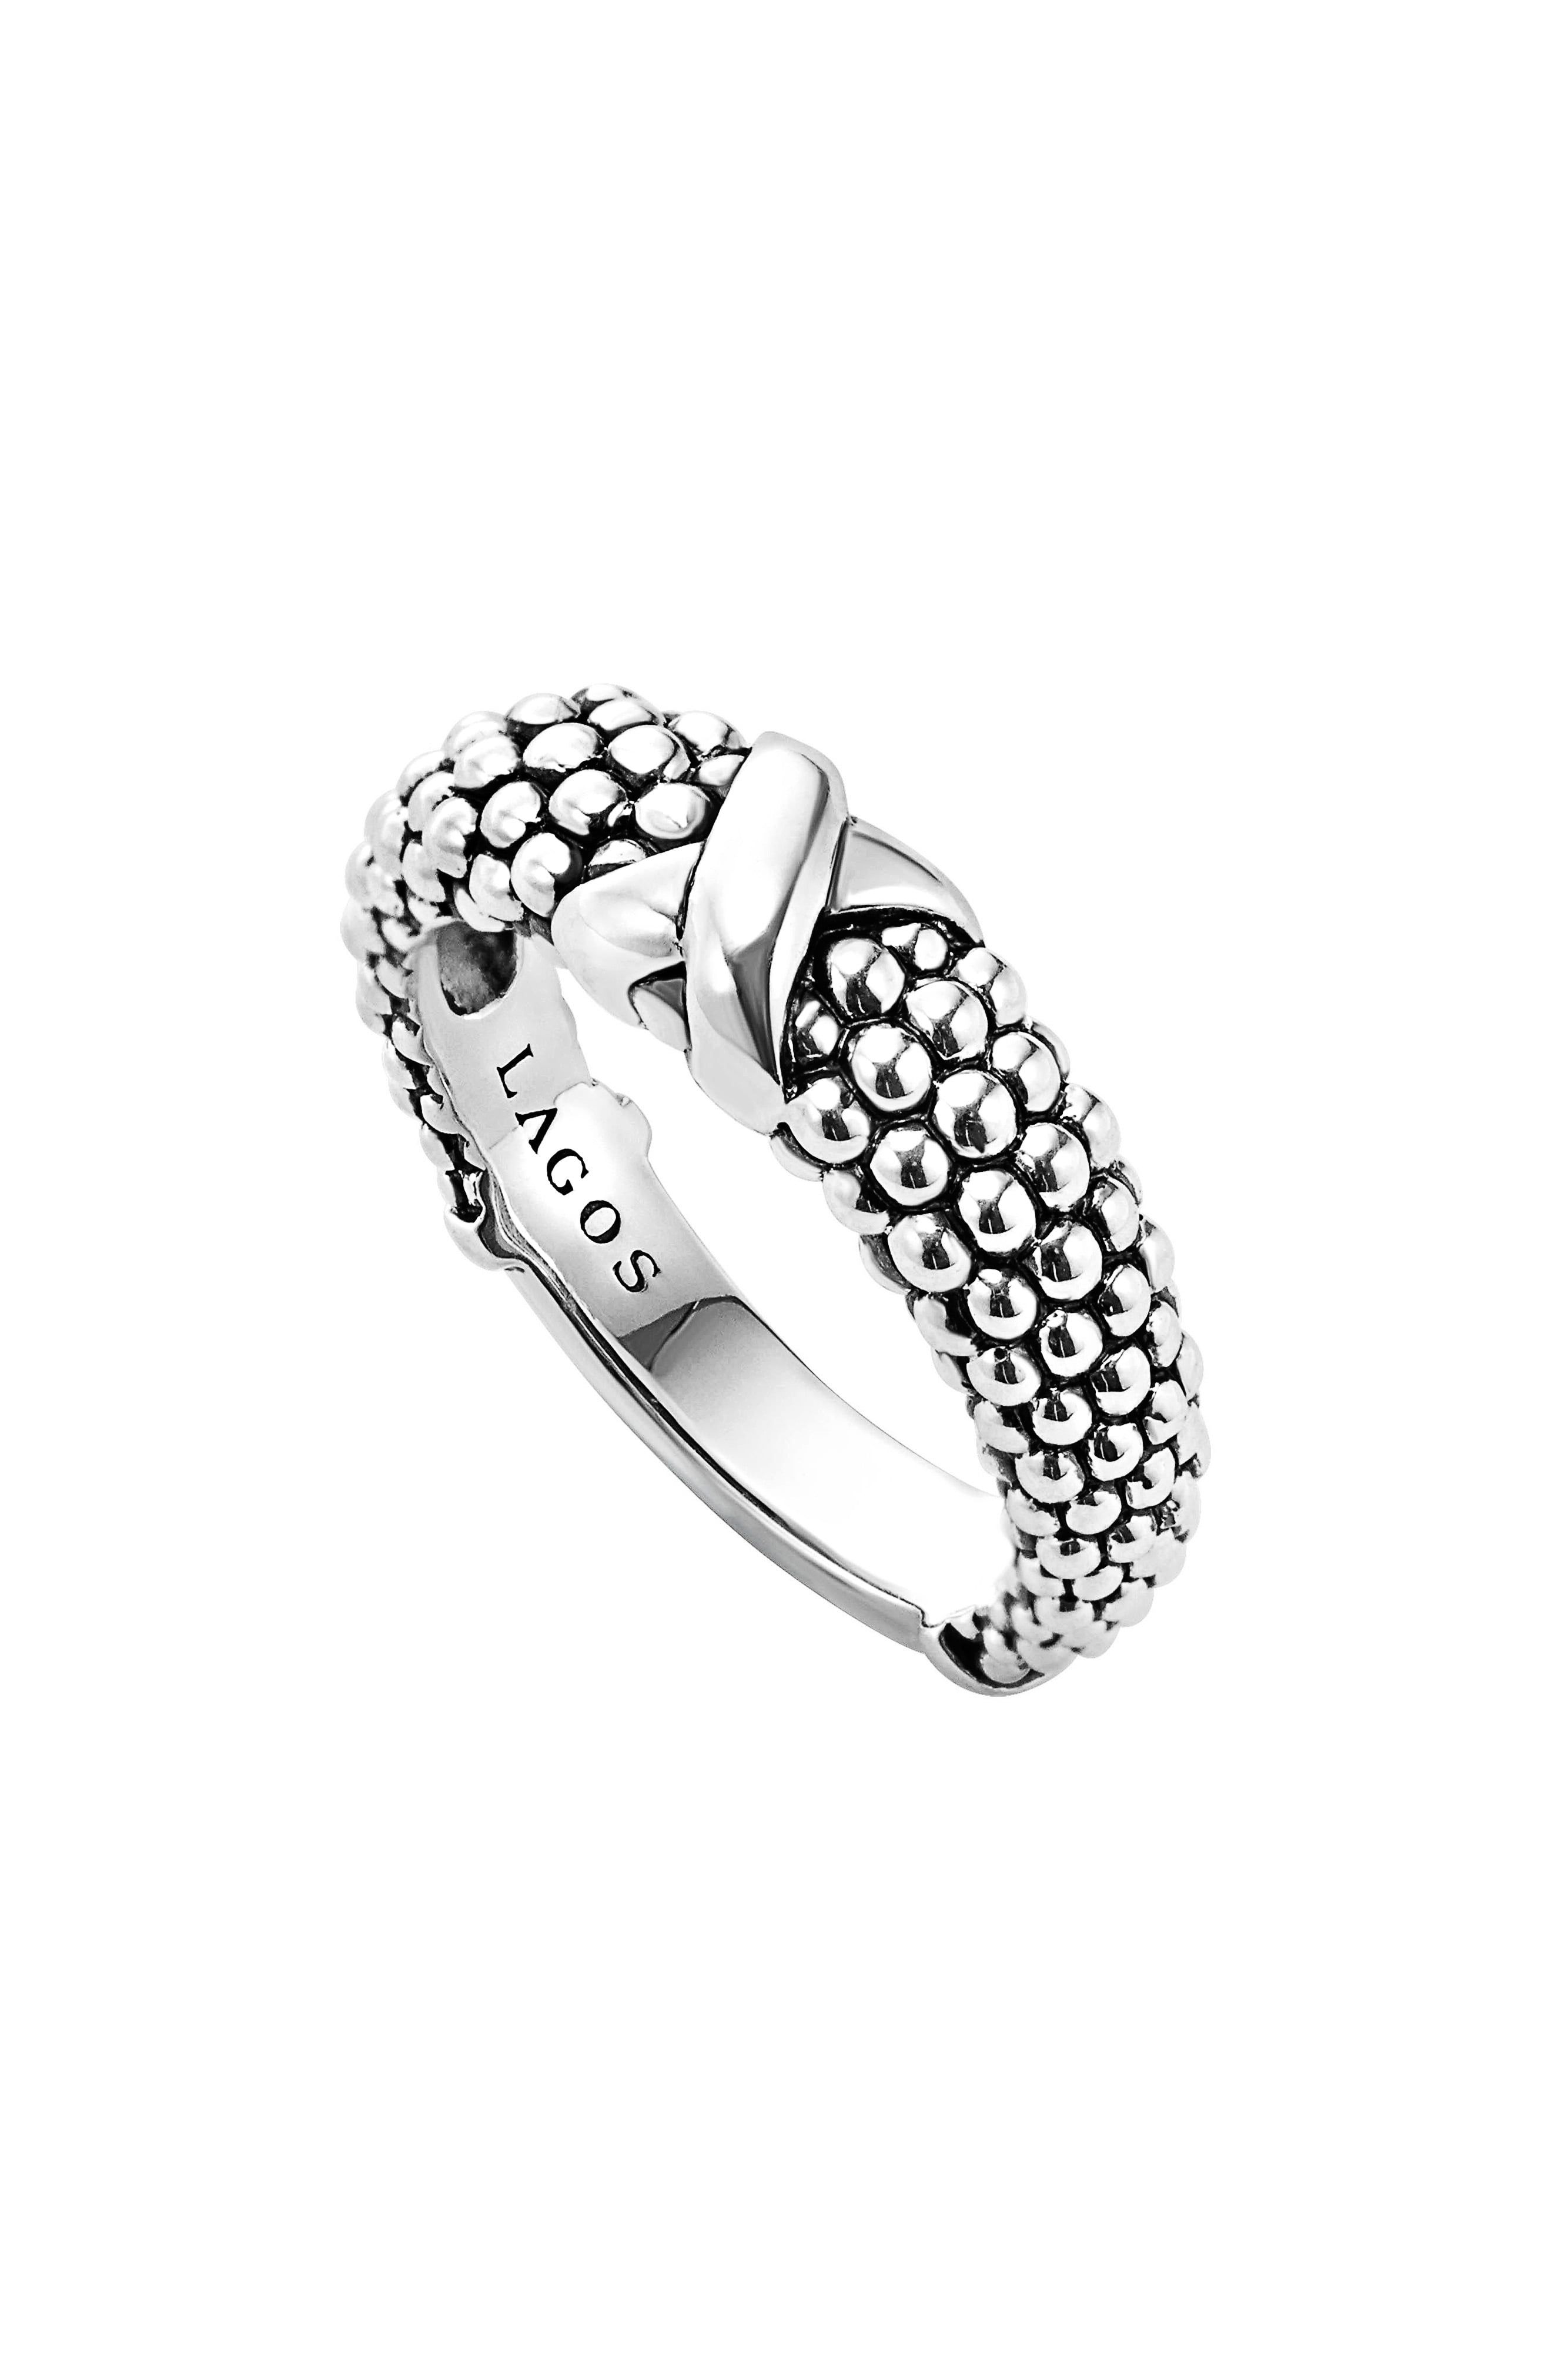 Women's Rings | Nordstrom Throughout Most Recent Diamond Layered Anniversary Bands In White Gold (View 16 of 20)